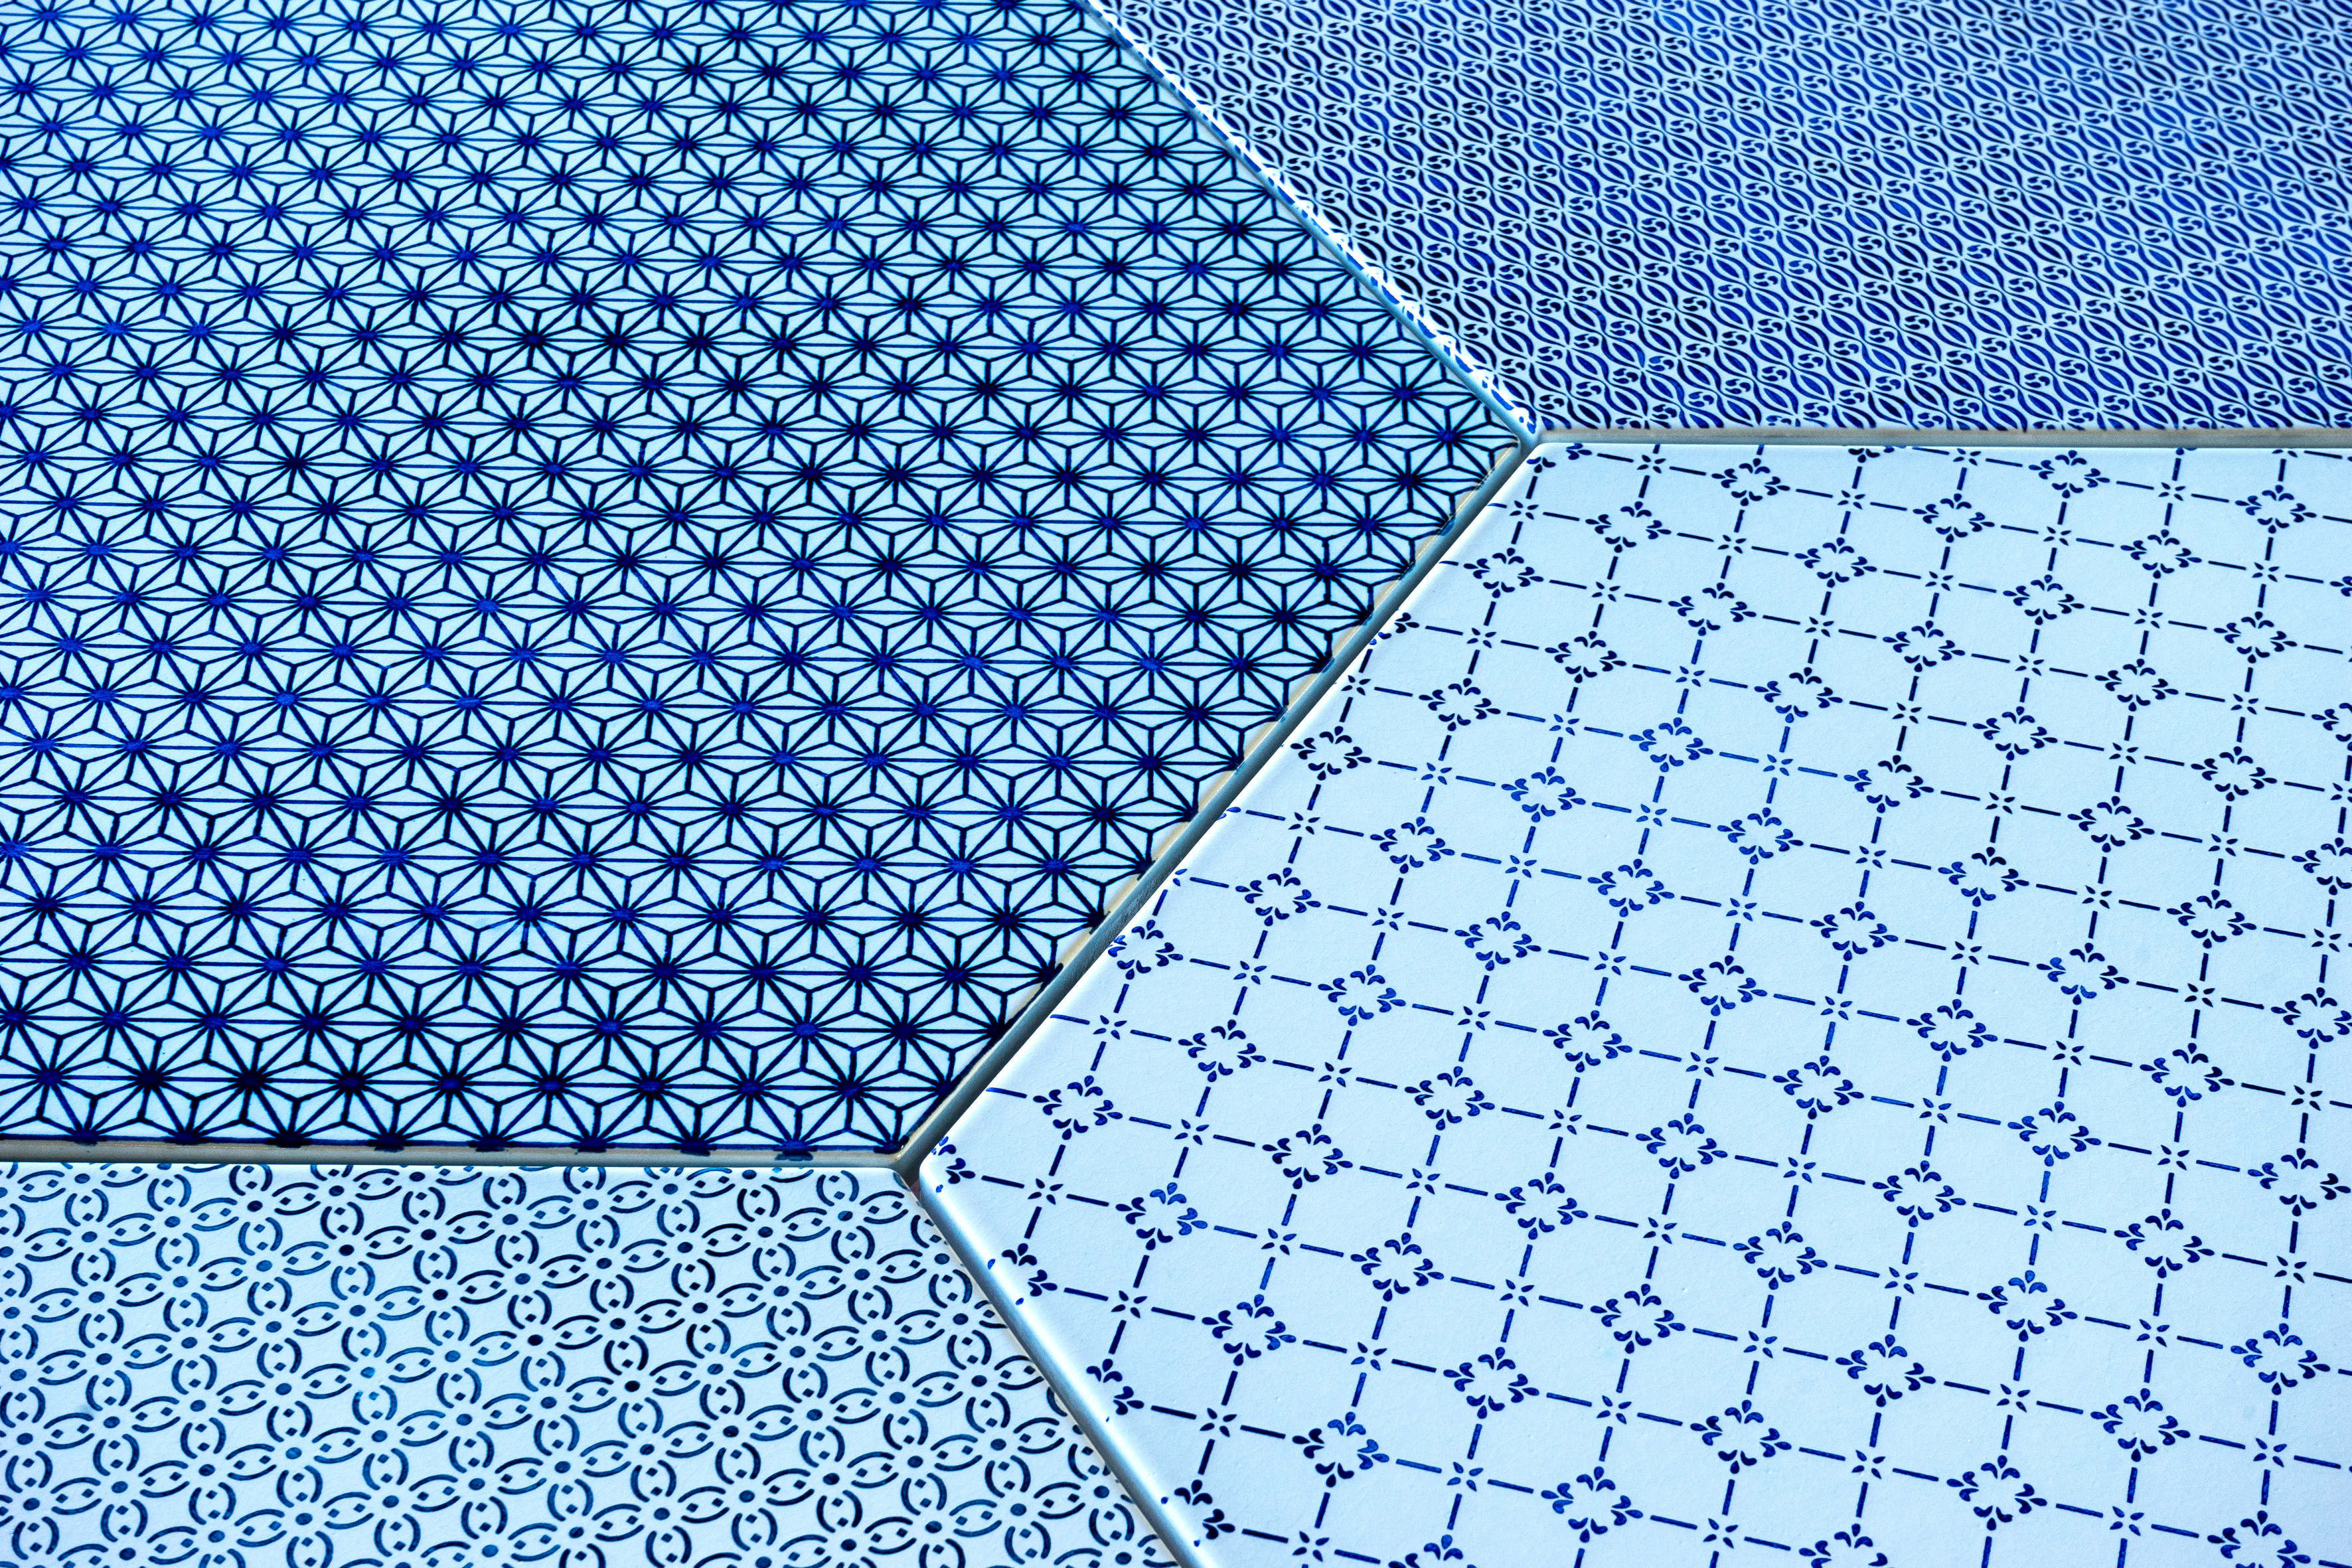 madeamano-collections-hexagonTable-table-details